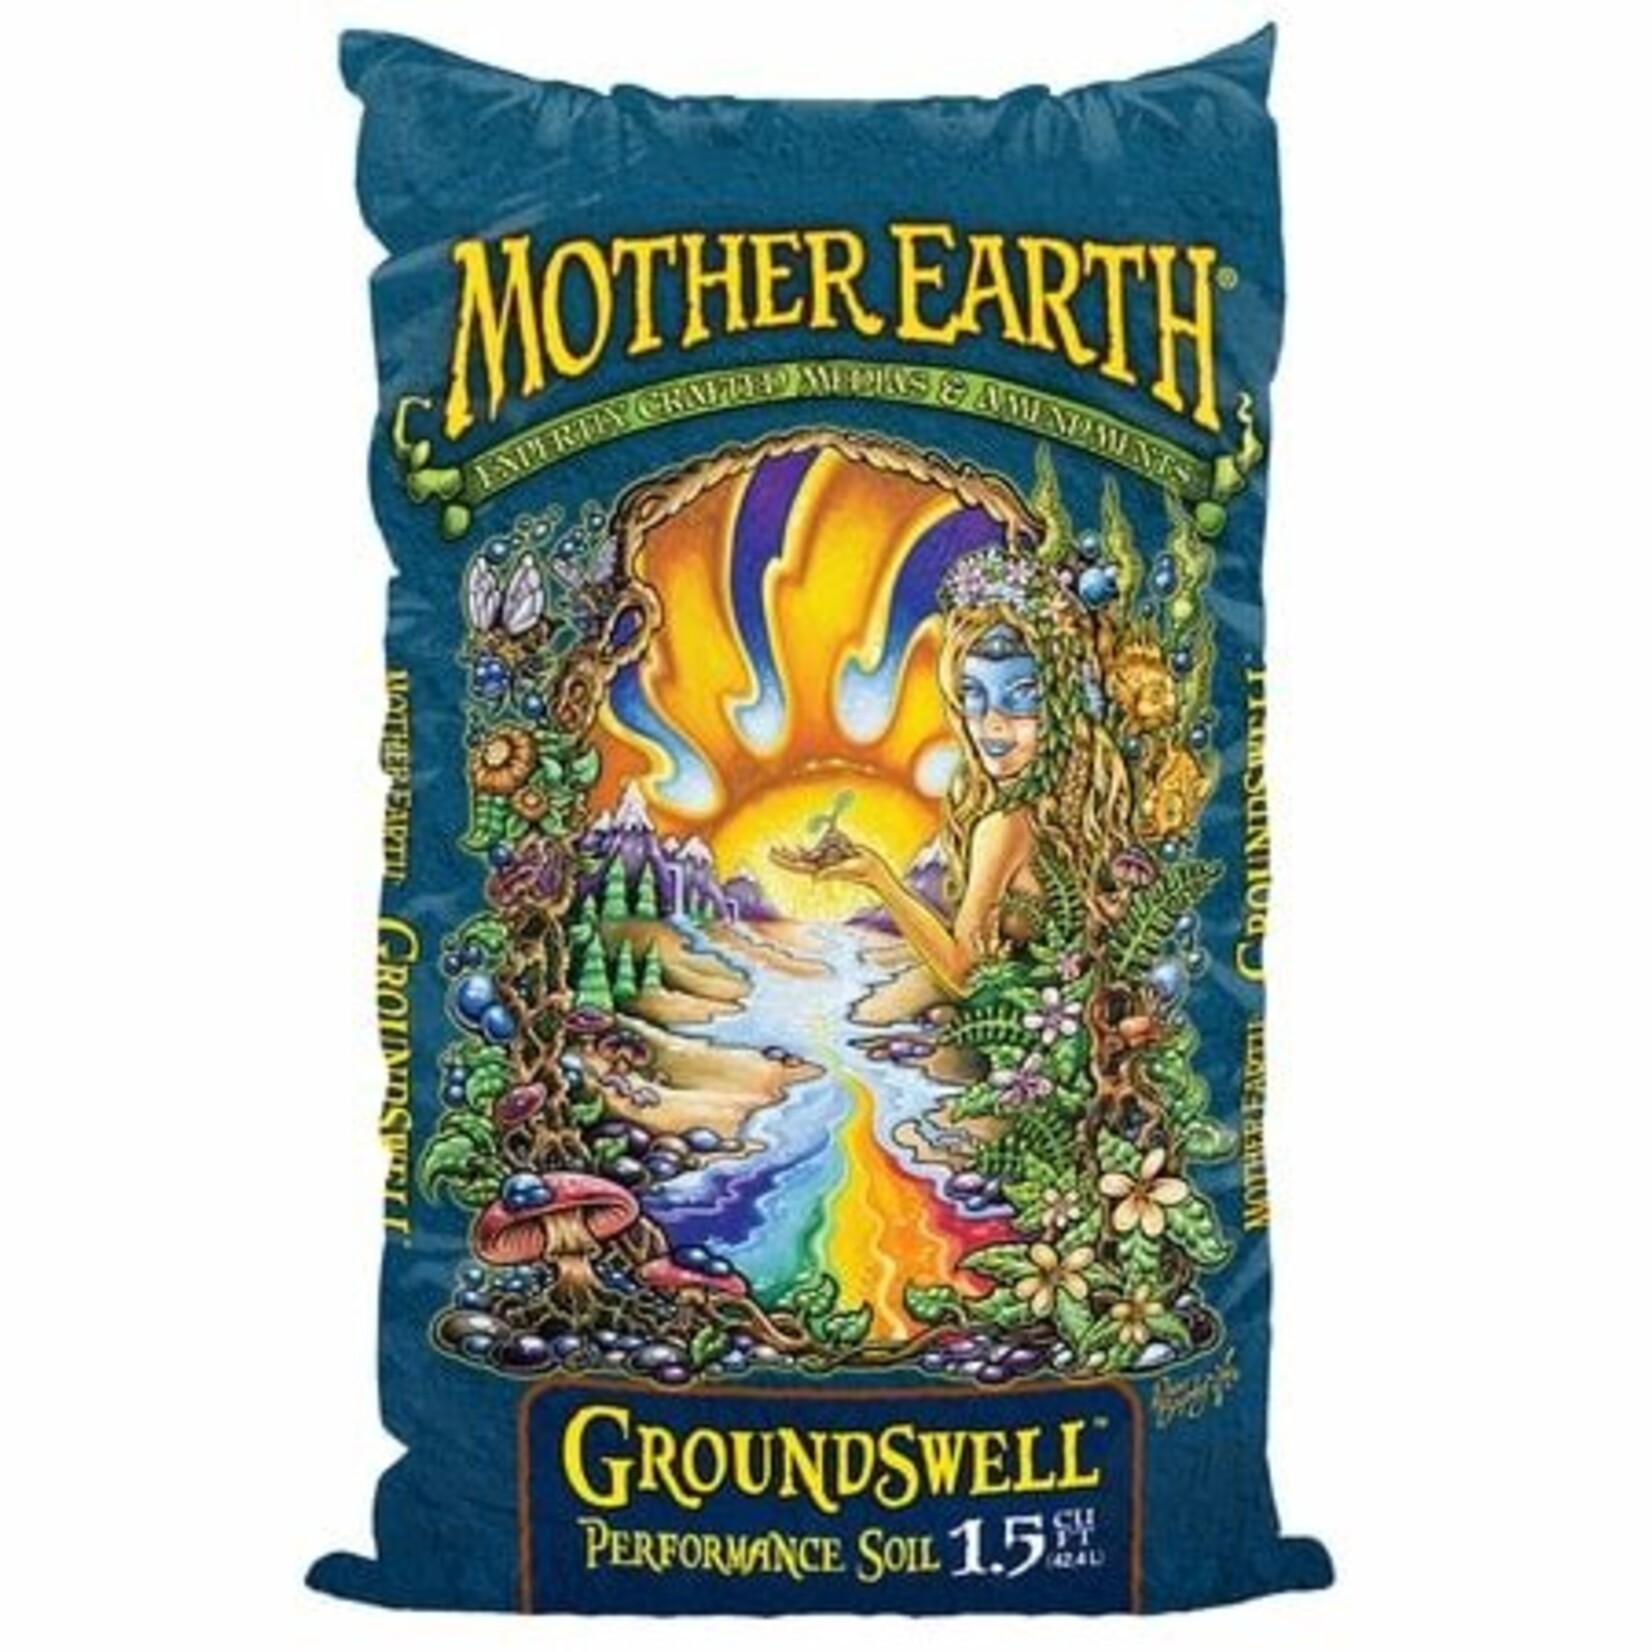 Mother Earth Mother Earth Groundswell Performance Soil 1.5CF